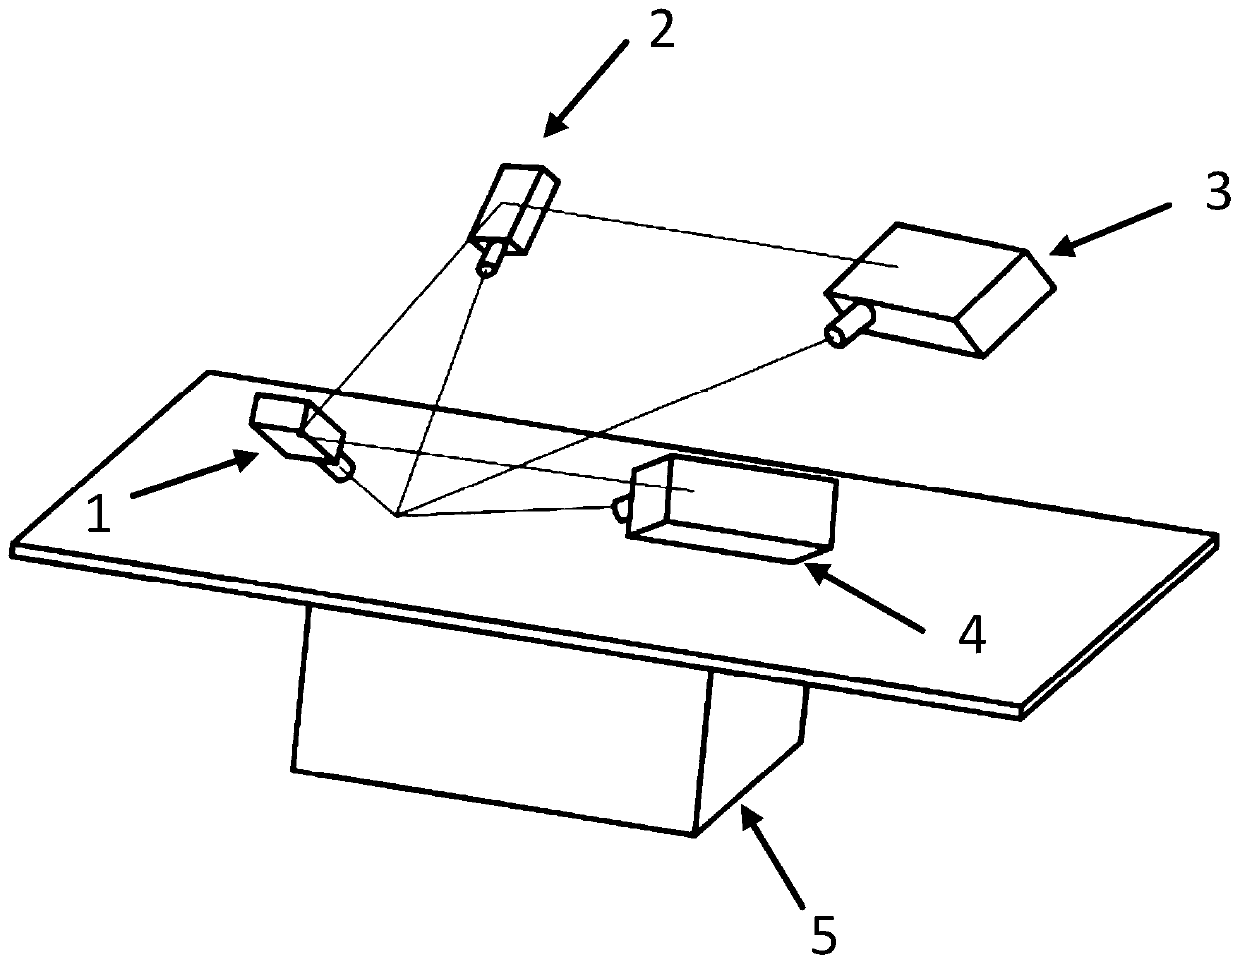 A multi-view stereoscopic vision body surface positioning tracking method